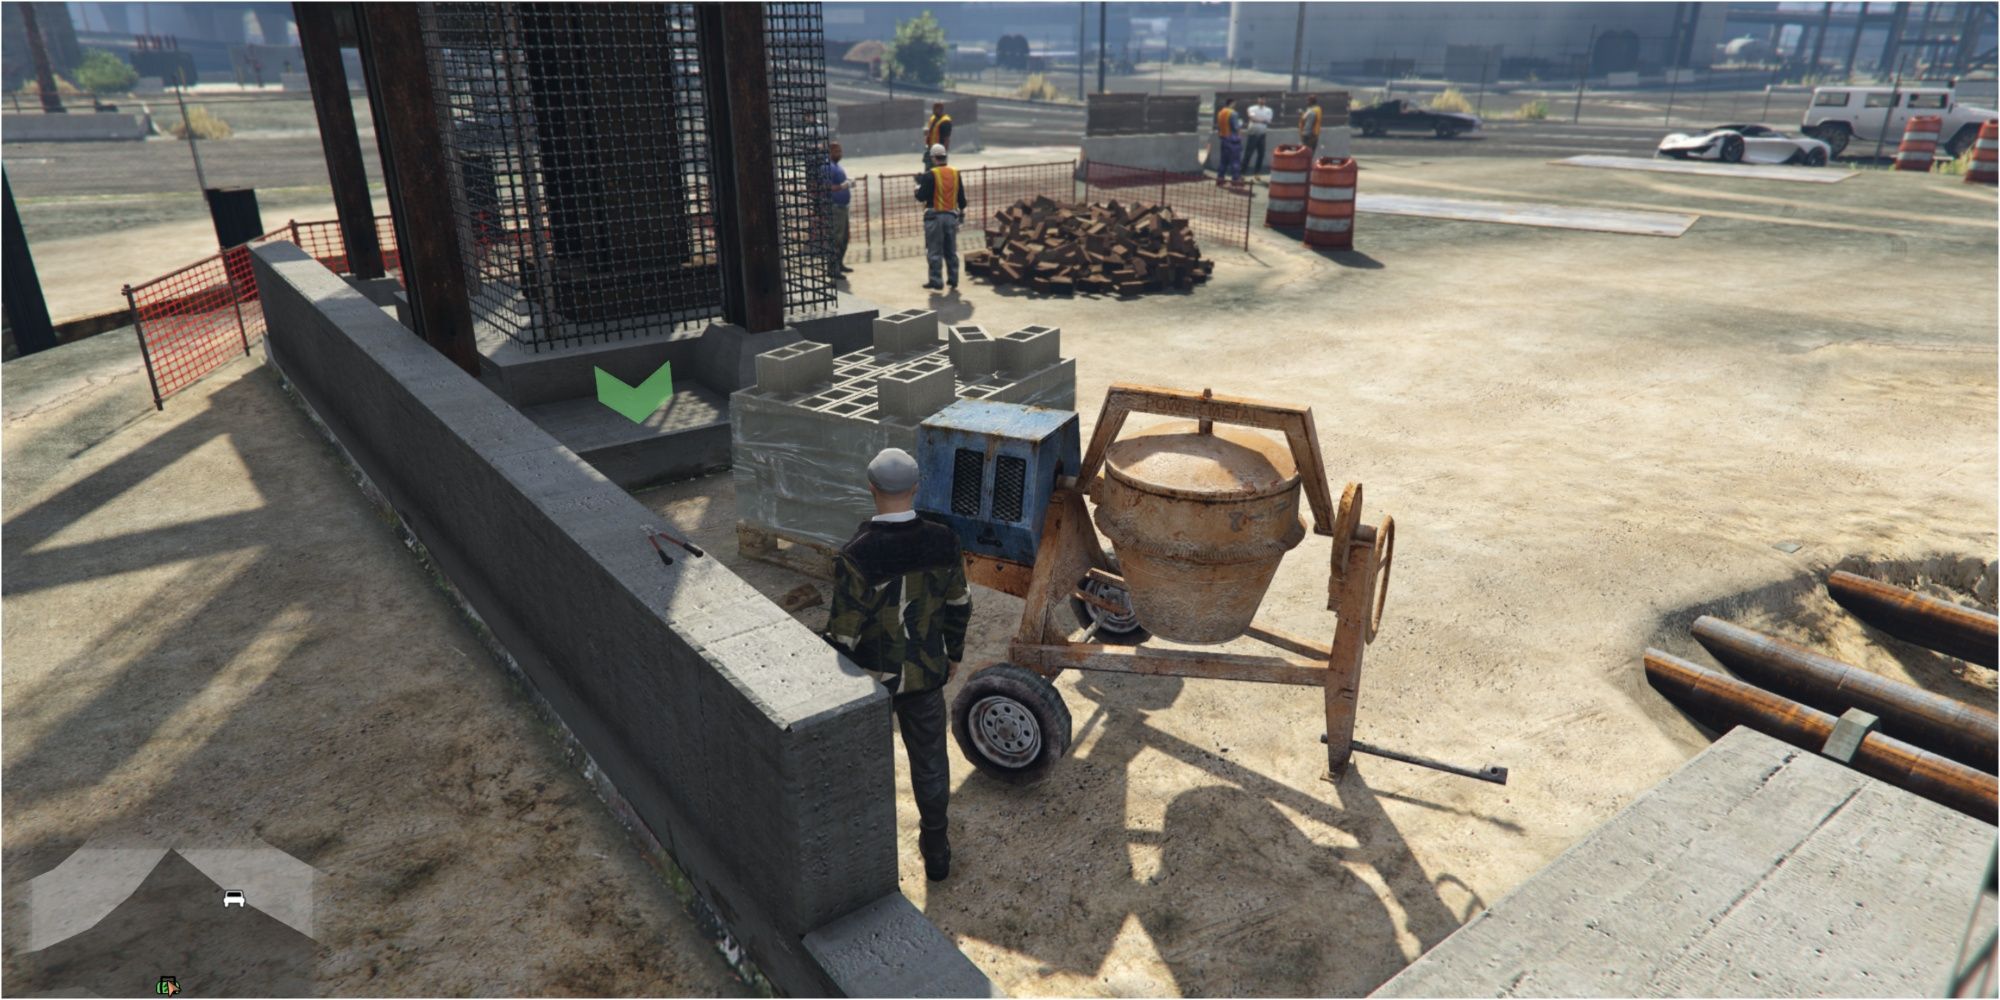 GTA Online Salvage Yard Heist The Cargo Ship Robbery Task #1 - Bolt Cutters